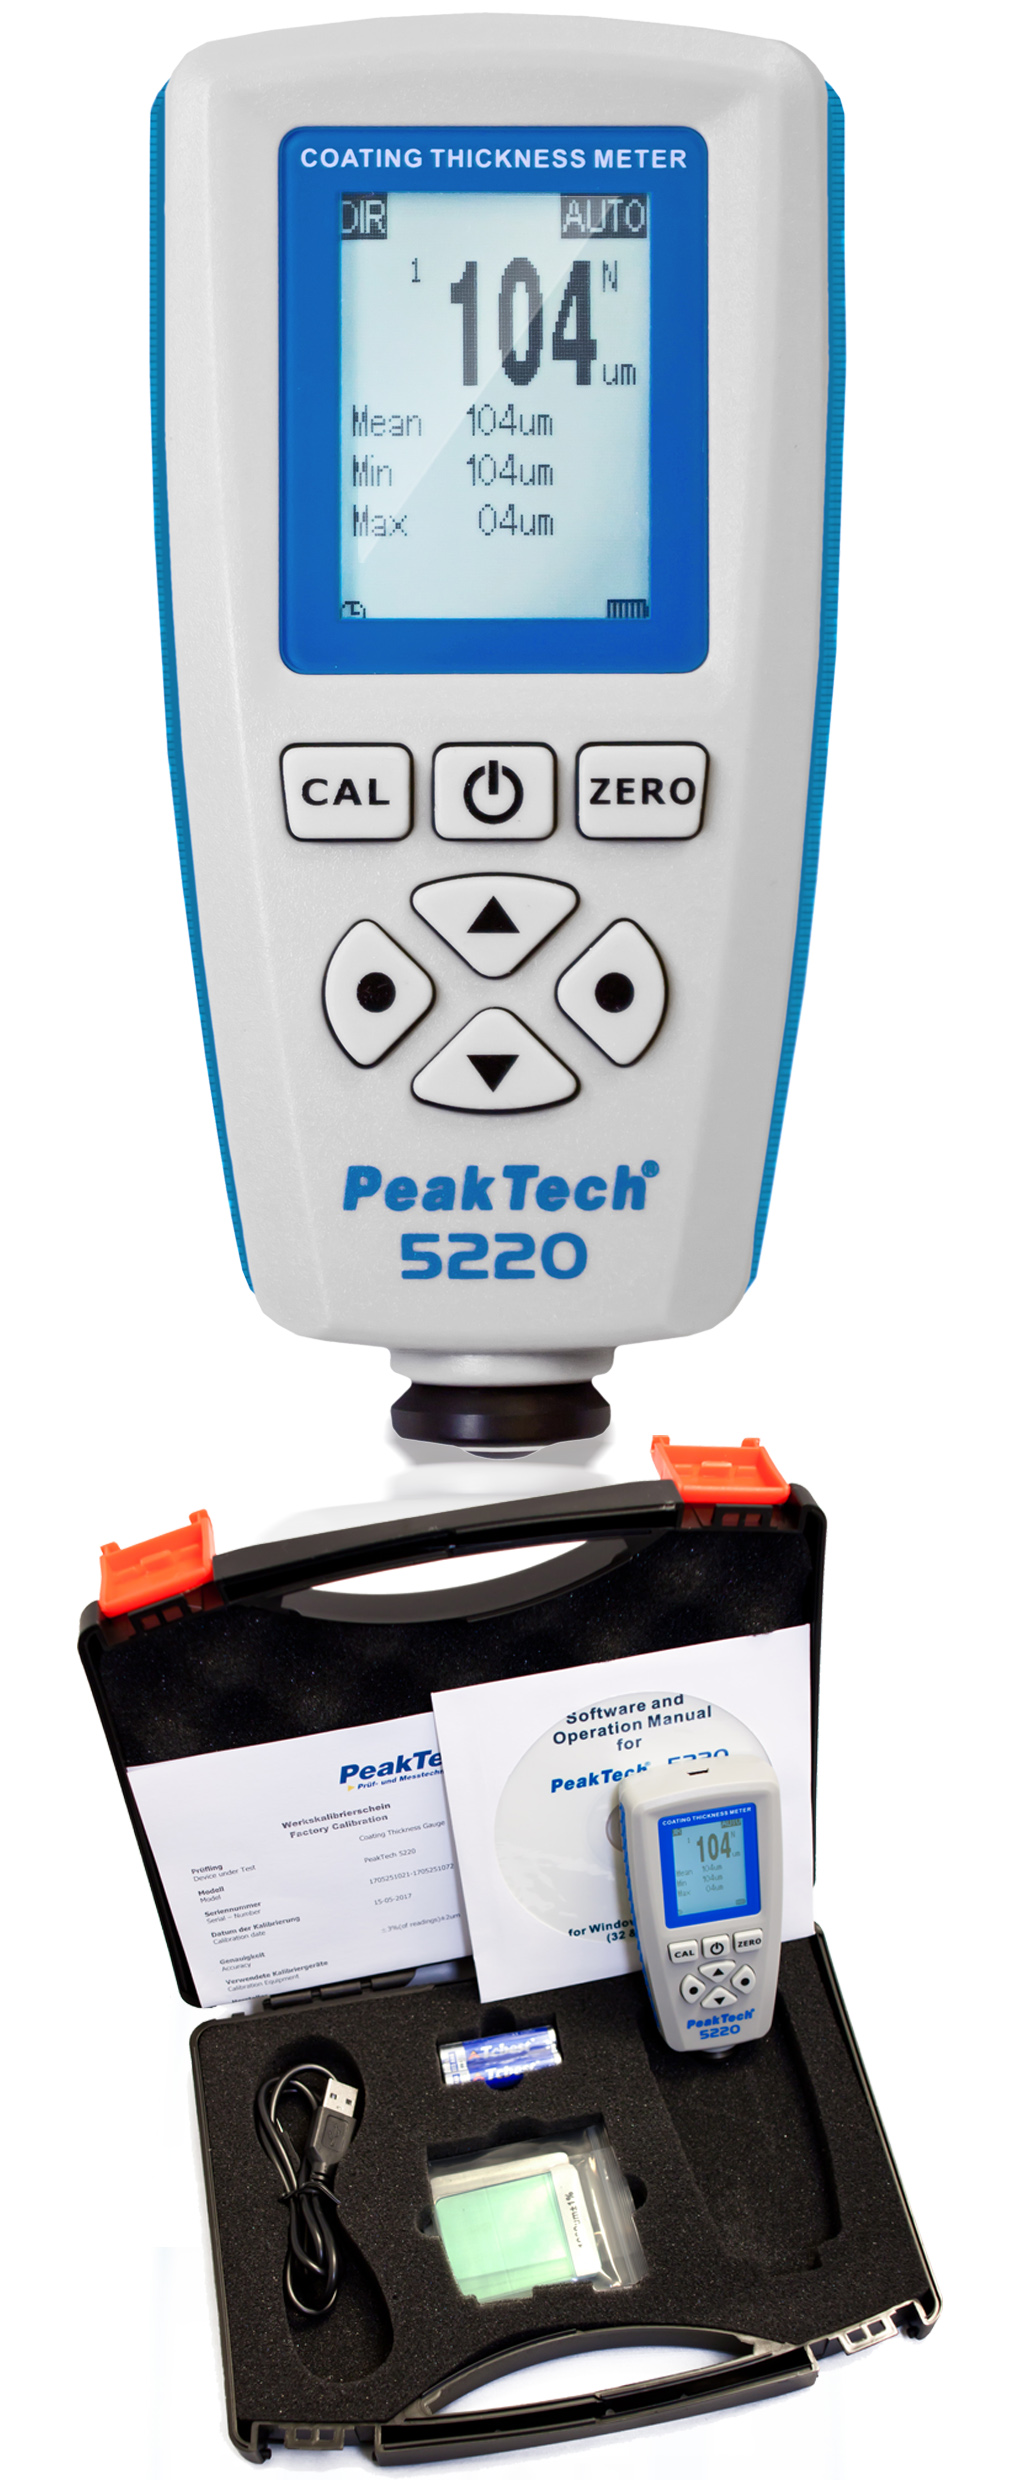 «PeakTech® P 5220» Coating and Material Thickness Meter